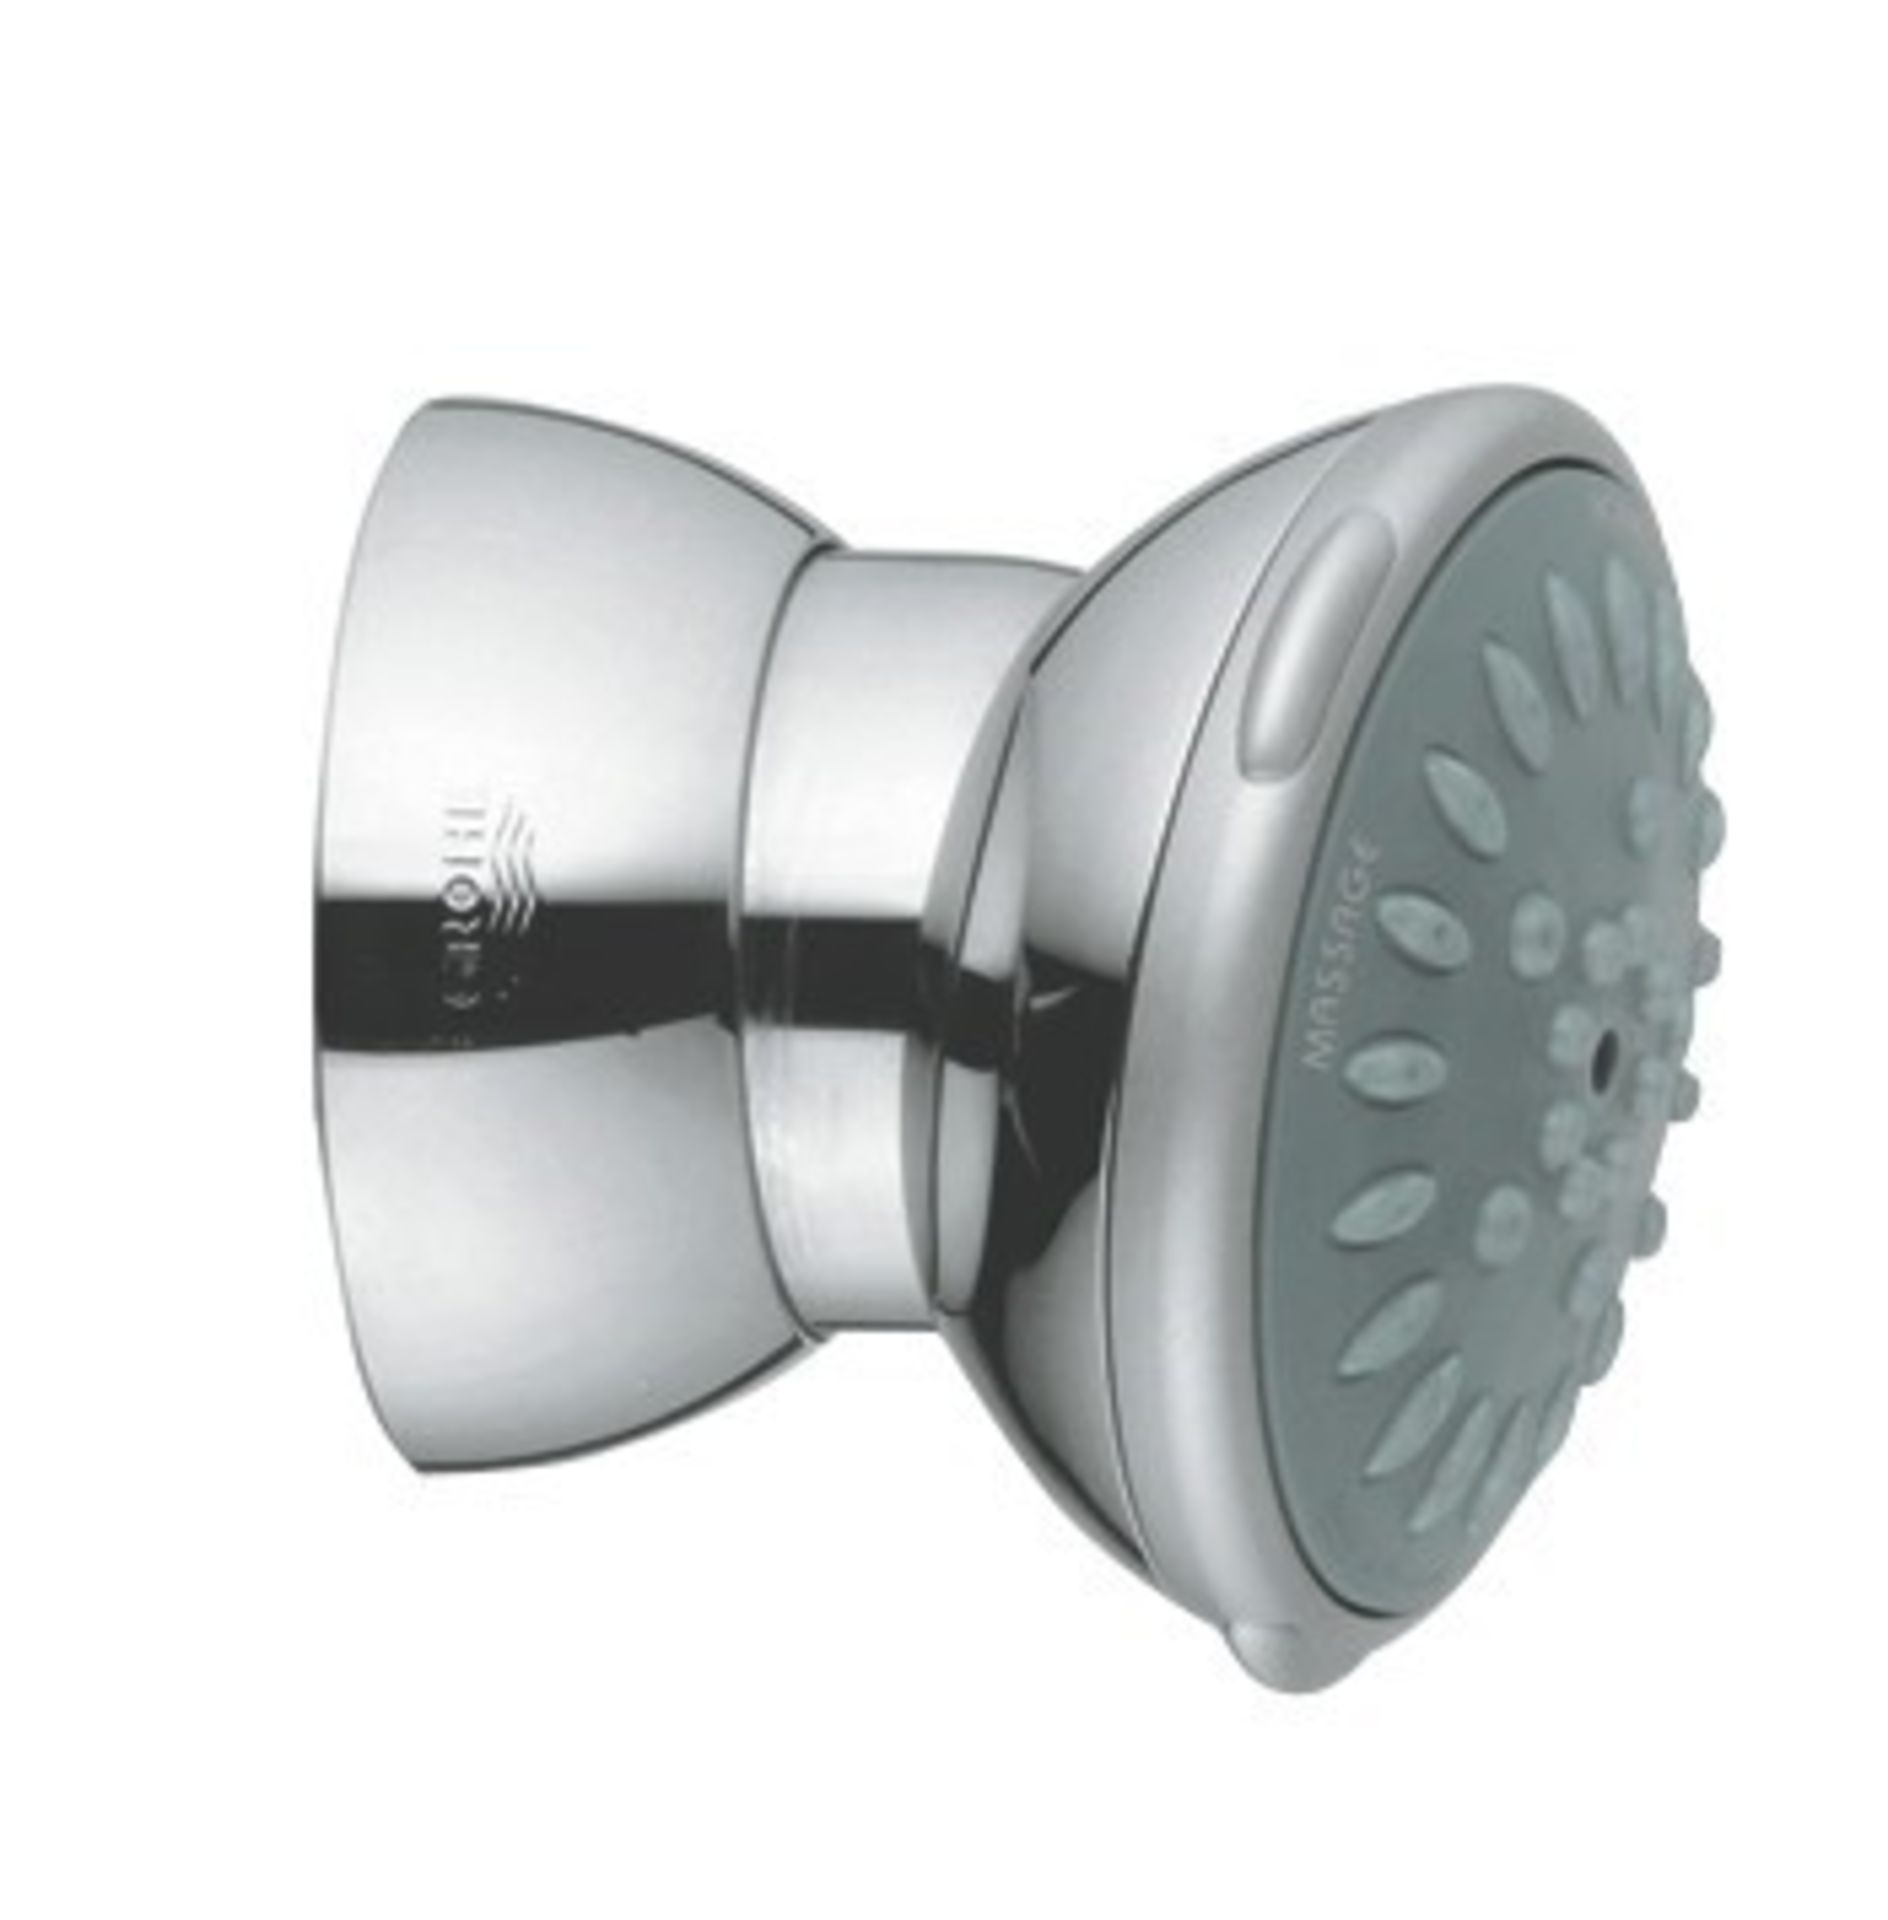 1 x Grohe Movario Side Shower Massage - Chrome Finish - Model: 28517000 - New & Boxed - CL088 - Loca - Image 4 of 4